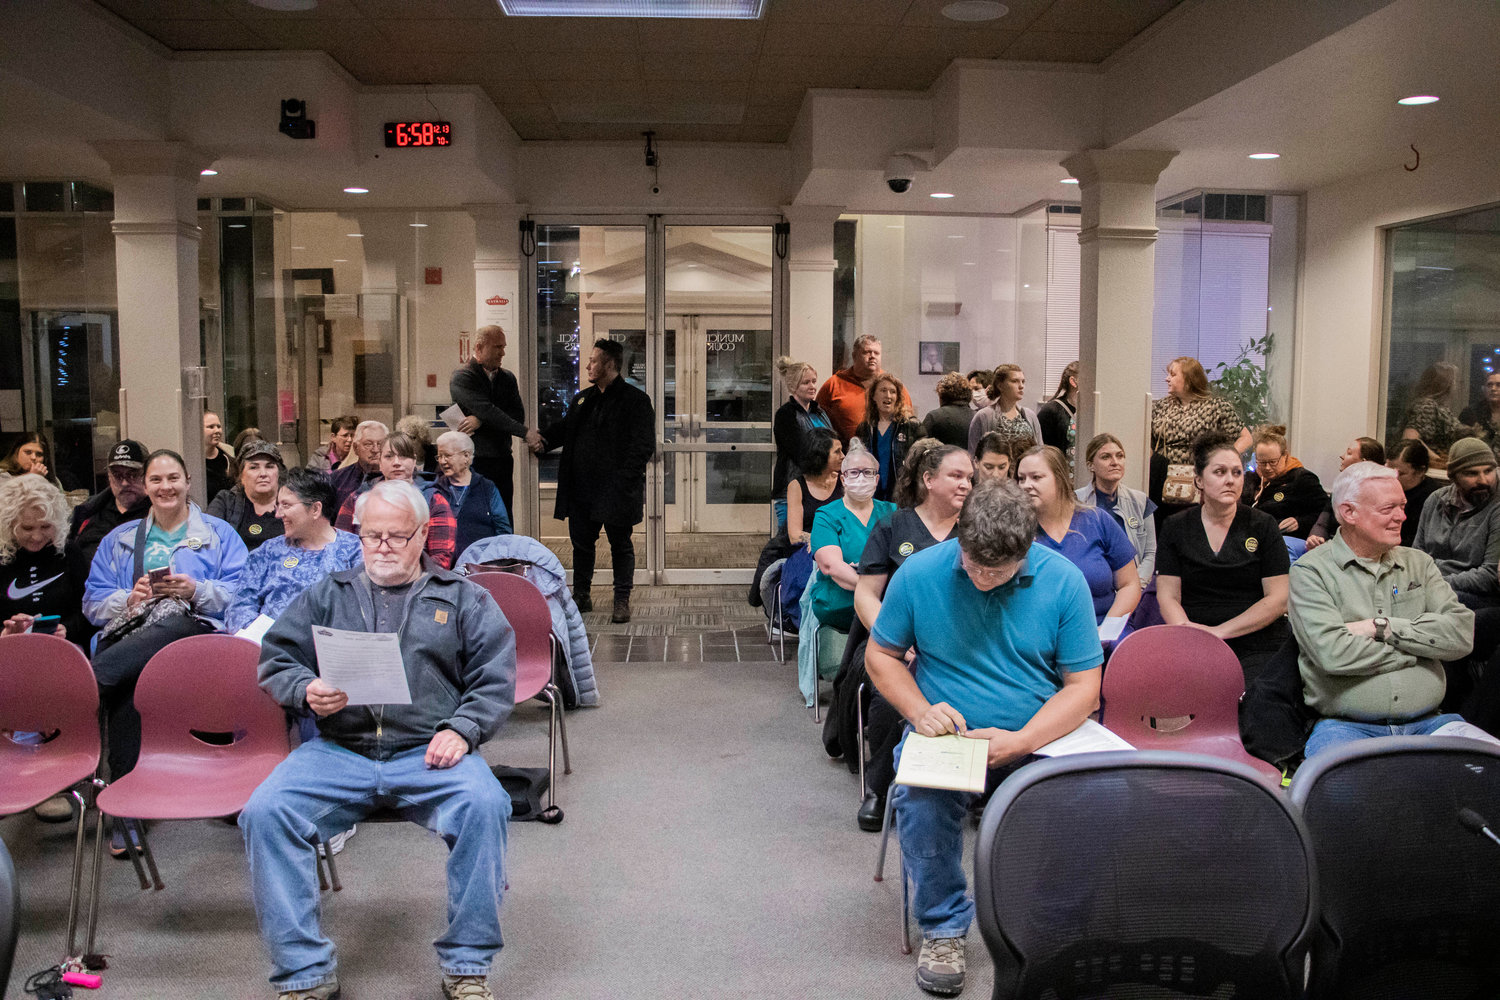 Centralia’s City Council chambers were packed on Tuesday night as more than 20 nurses from Providence Centralia Hospital came to ask for support in fighting for better staffing and working conditions.